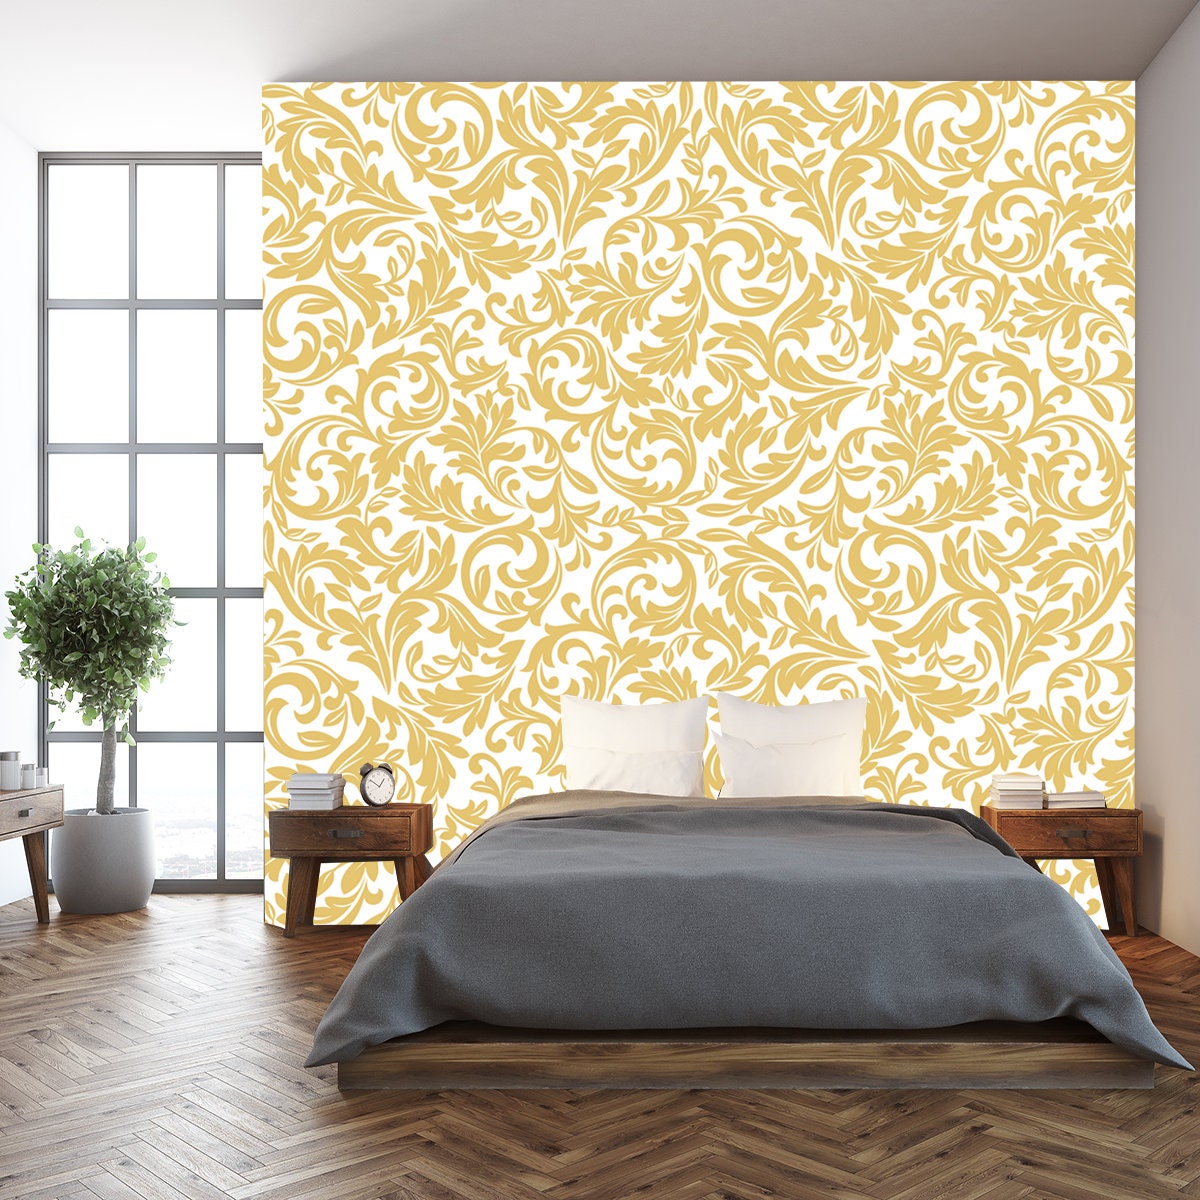 Floral Pattern. Wallpaper Baroque, Damask. White and Gold Ornament Wallpaper Bedroom Mural